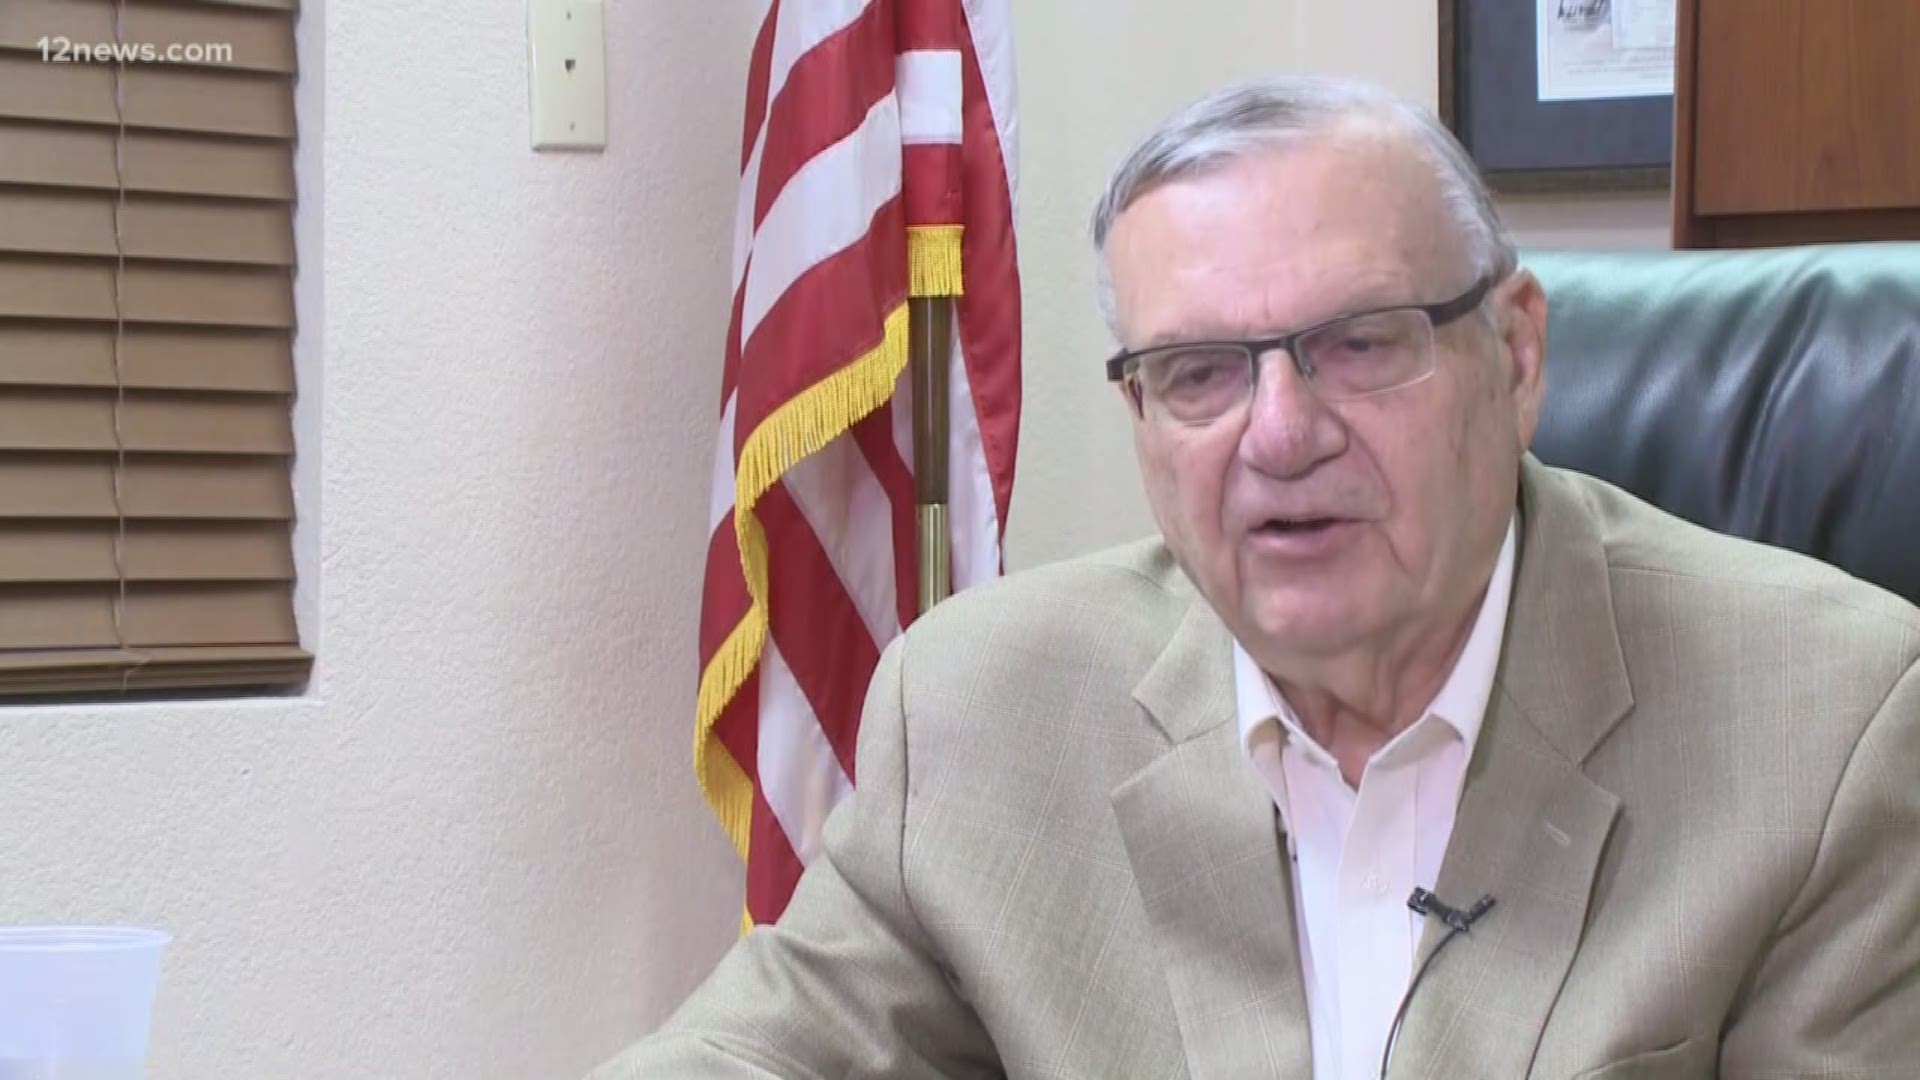 Joe Arpaio spoke to 12 News about why he wants to run for Maricopa County sheriff once again. Team 12's Antonia Mejia has the latest.